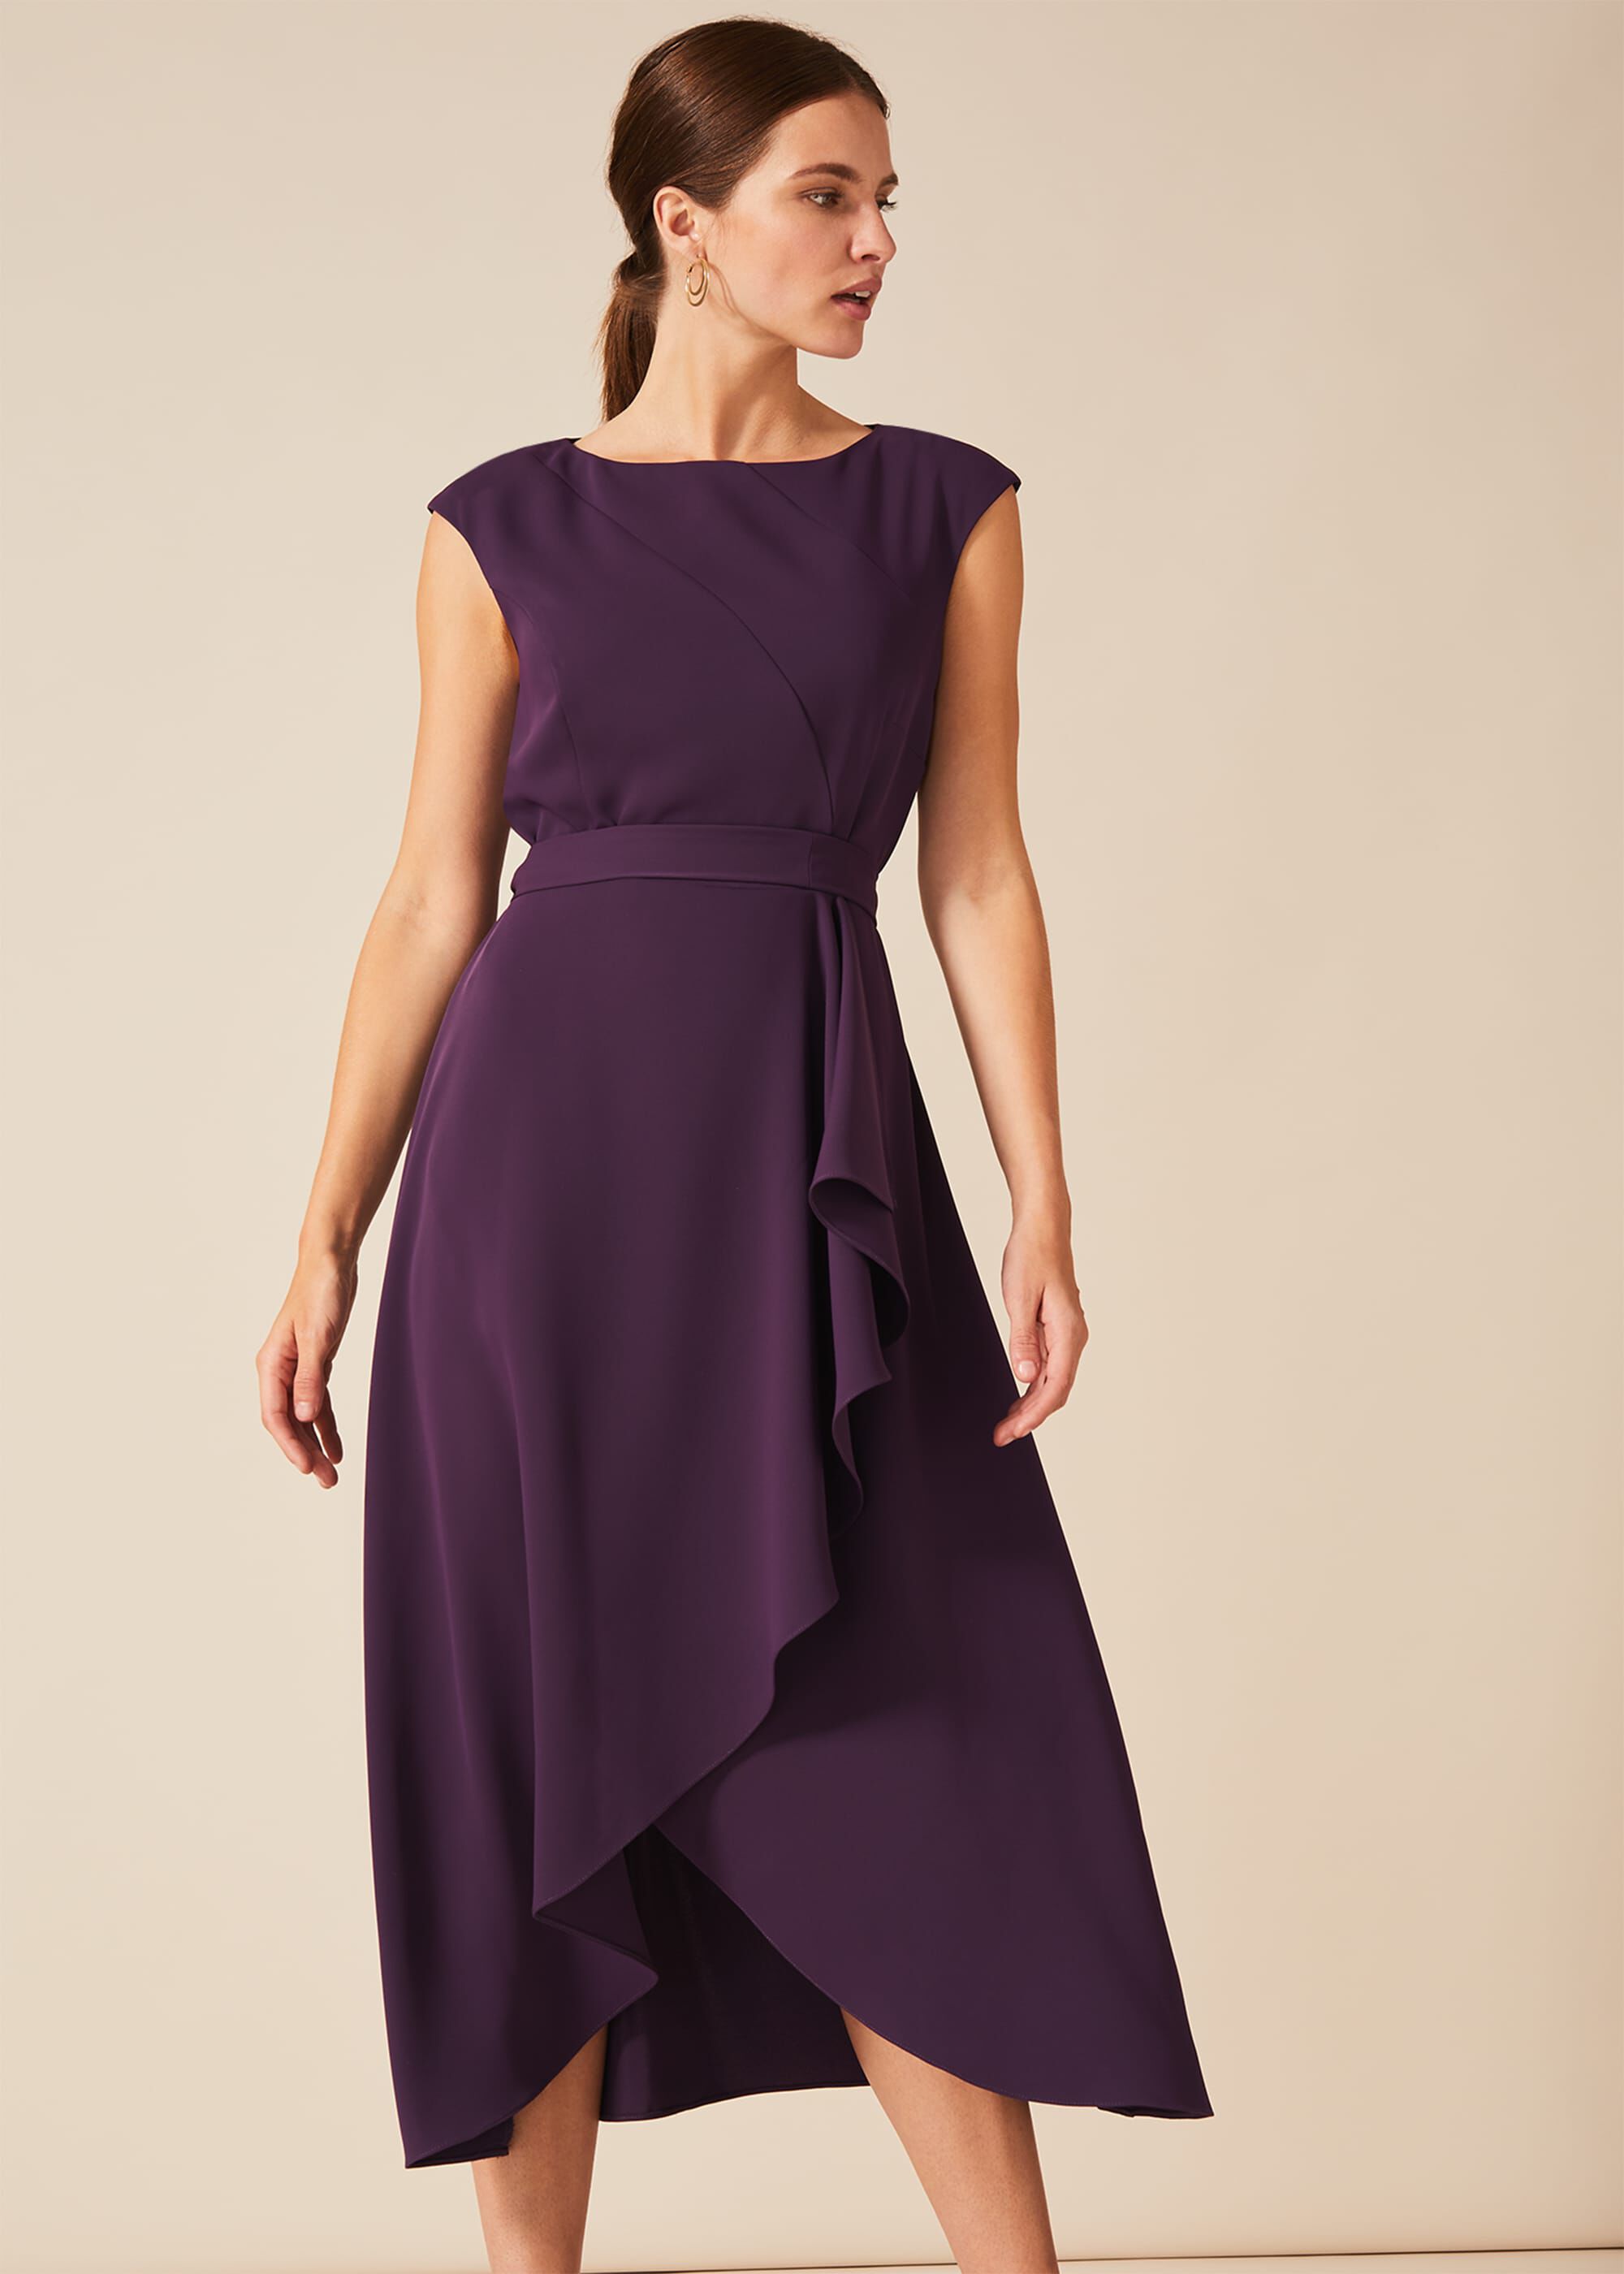 phase 8 special occasion dress